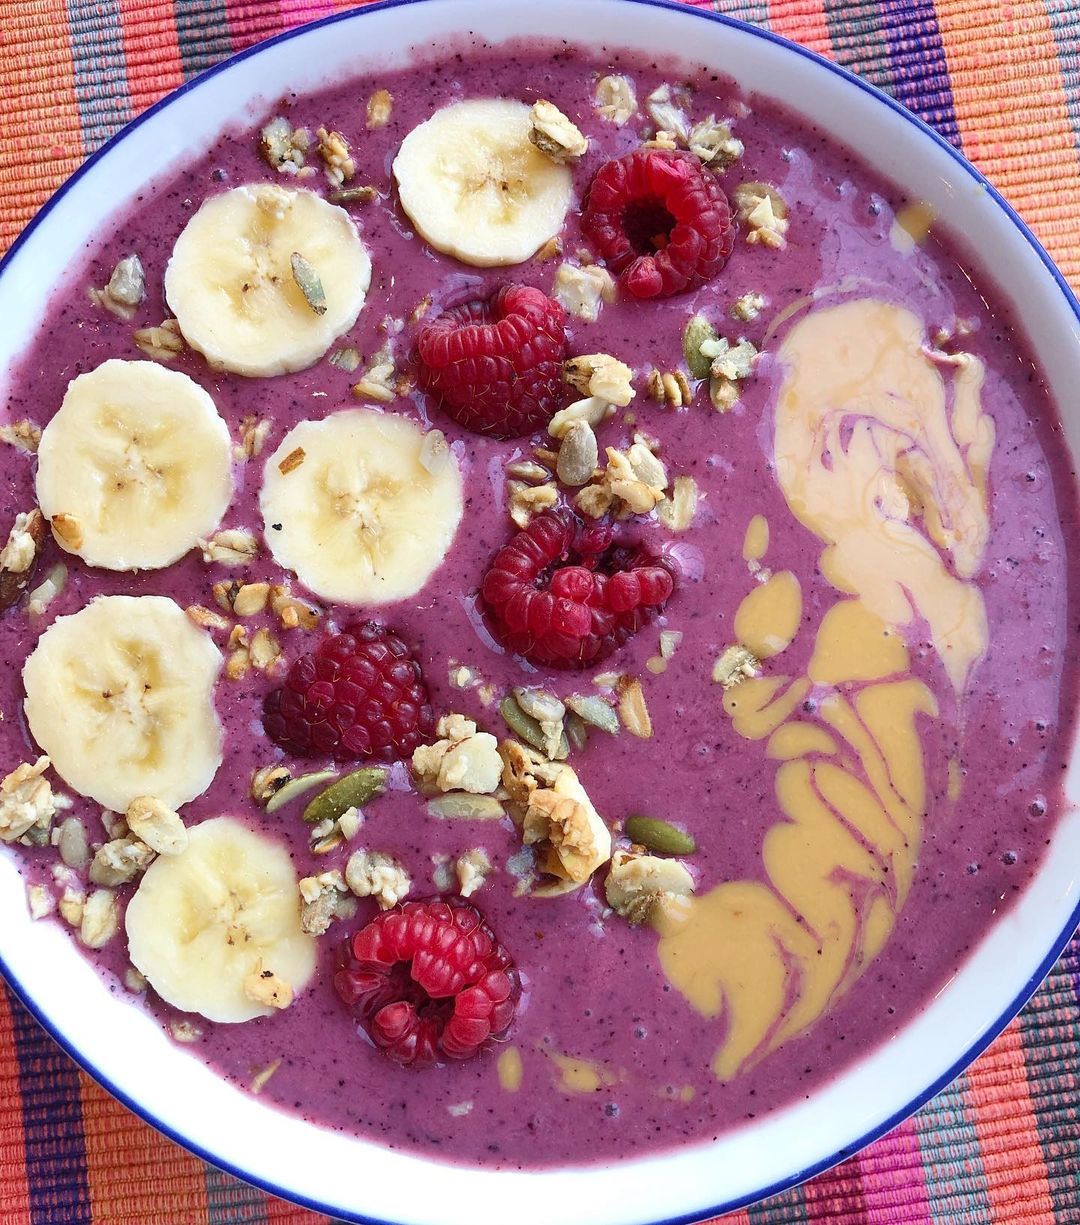 Continuing the Berry Hype with My Deliciously Sweet Smoothie Bowl